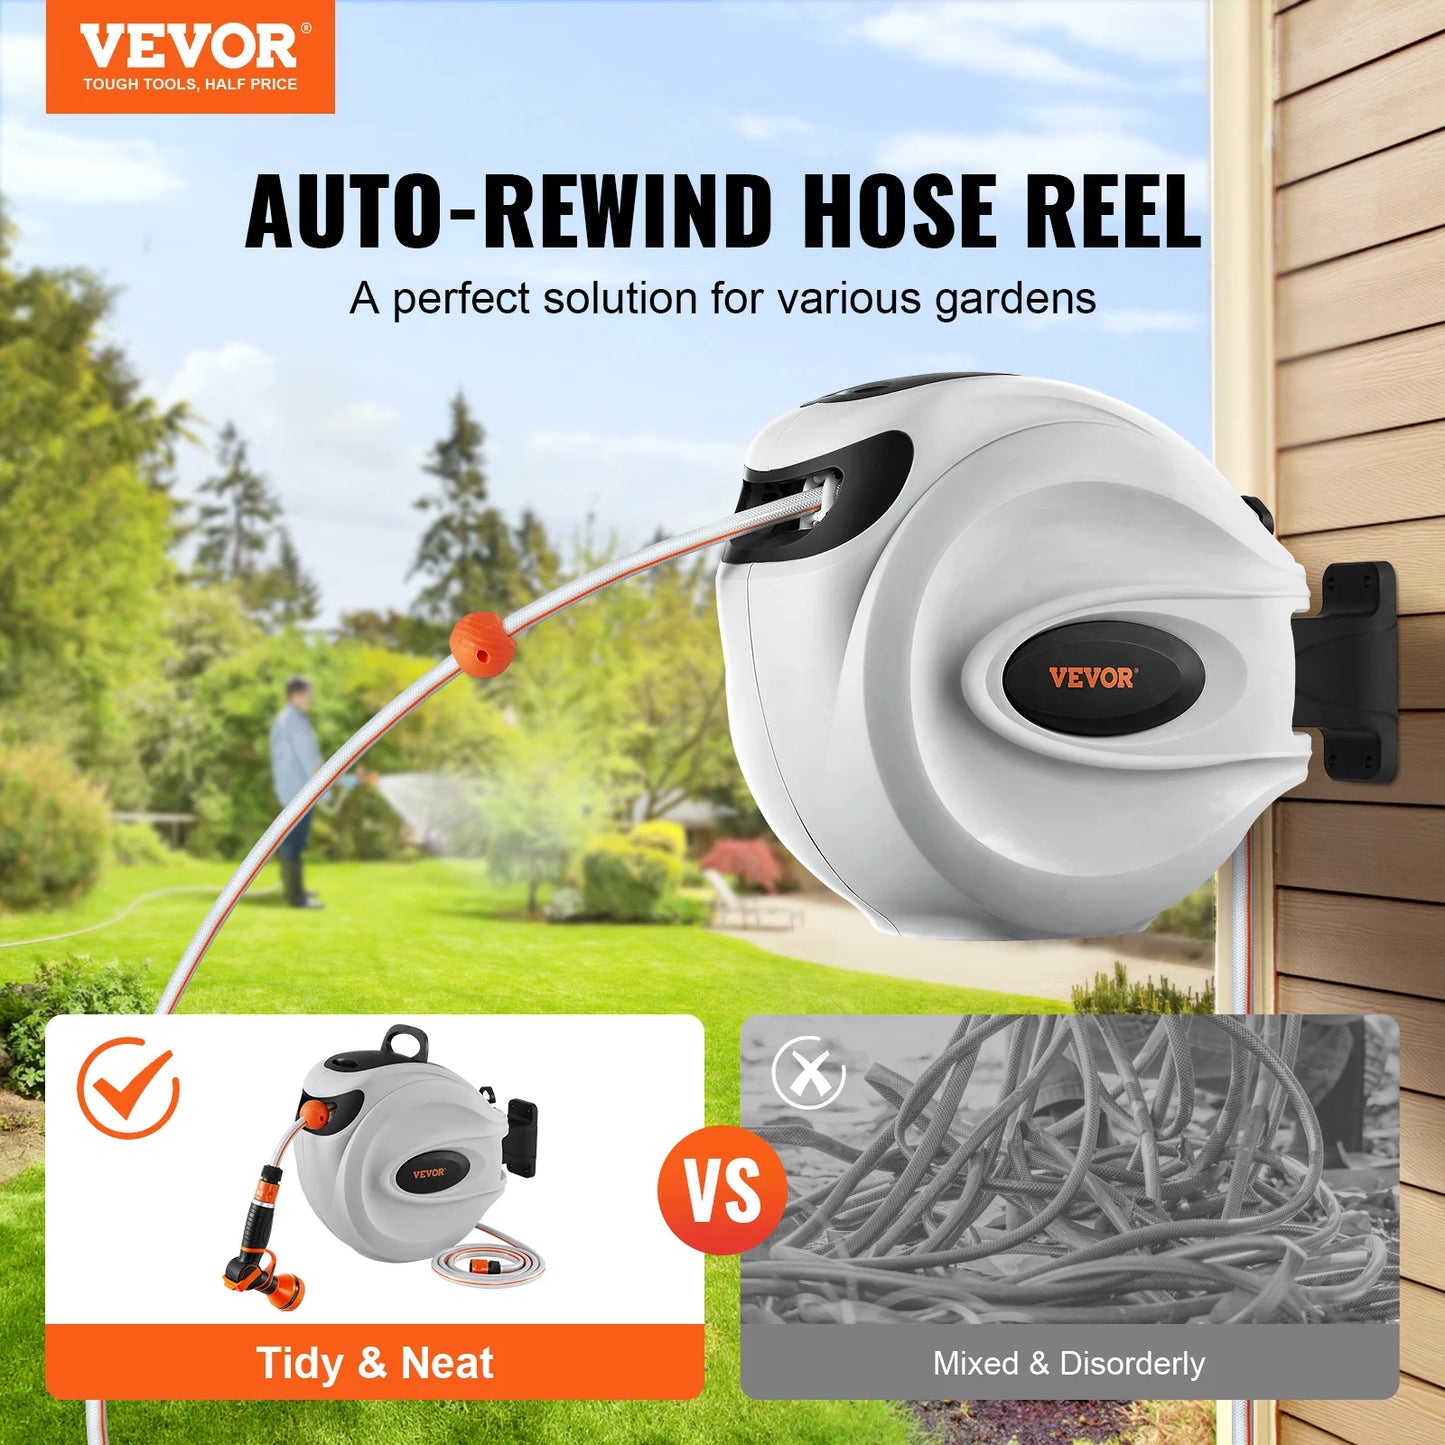 VEVOR Retractable Hose Reel1/2 inch 180° Swivel Bracket Wall-Mounted Garden Water Hose Reel with 9-Pattern Nozzle and 3 Fast